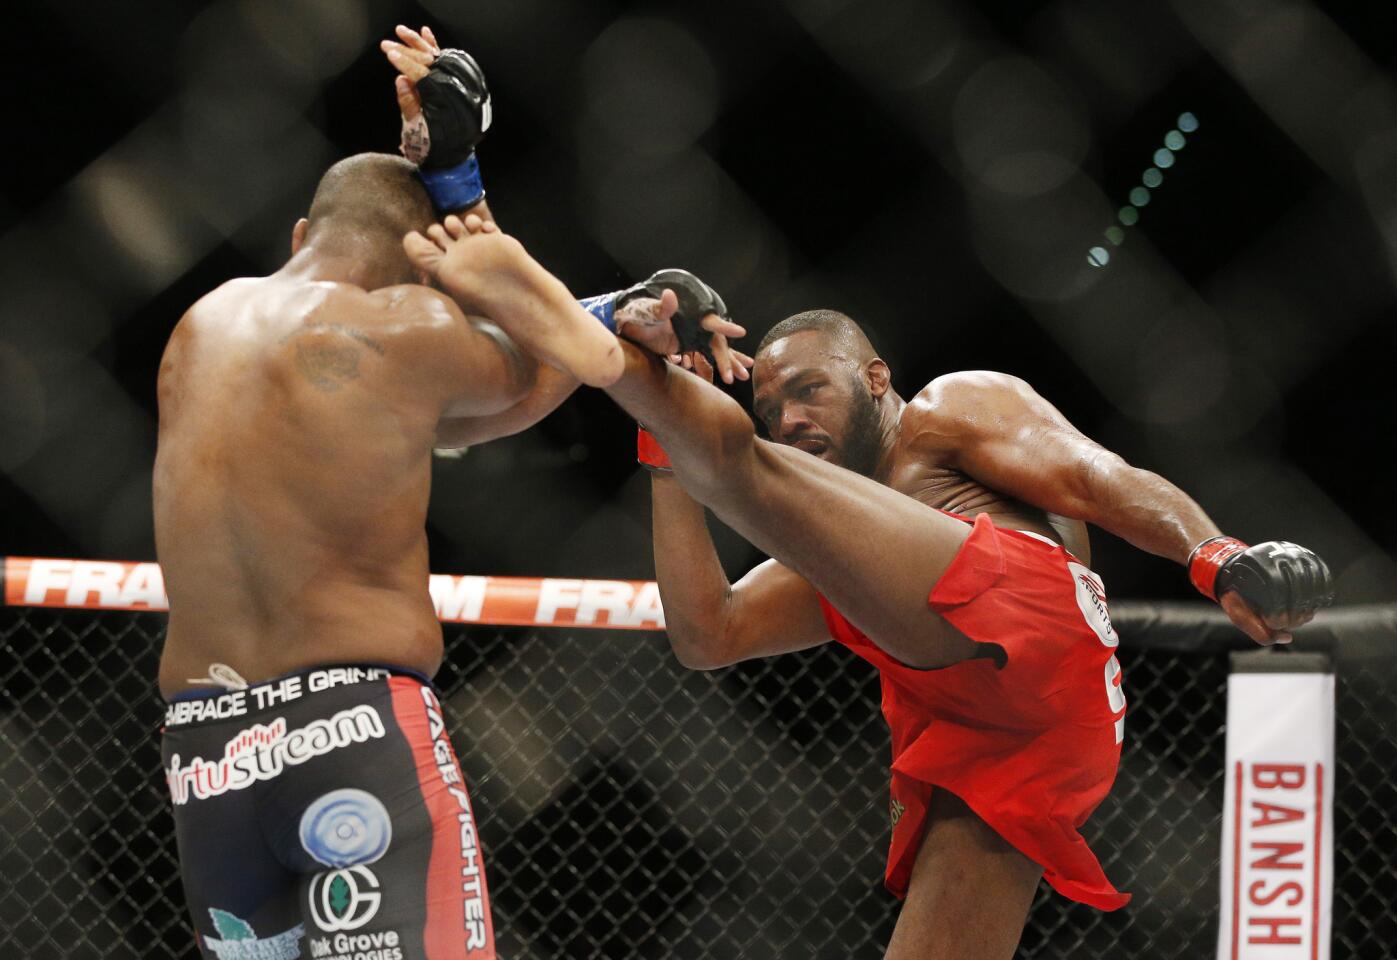 Daniel Cormier tries to block a kick by Jon Jones during their light-heavyweight championship fight at the MGM Grand Garden Arena.